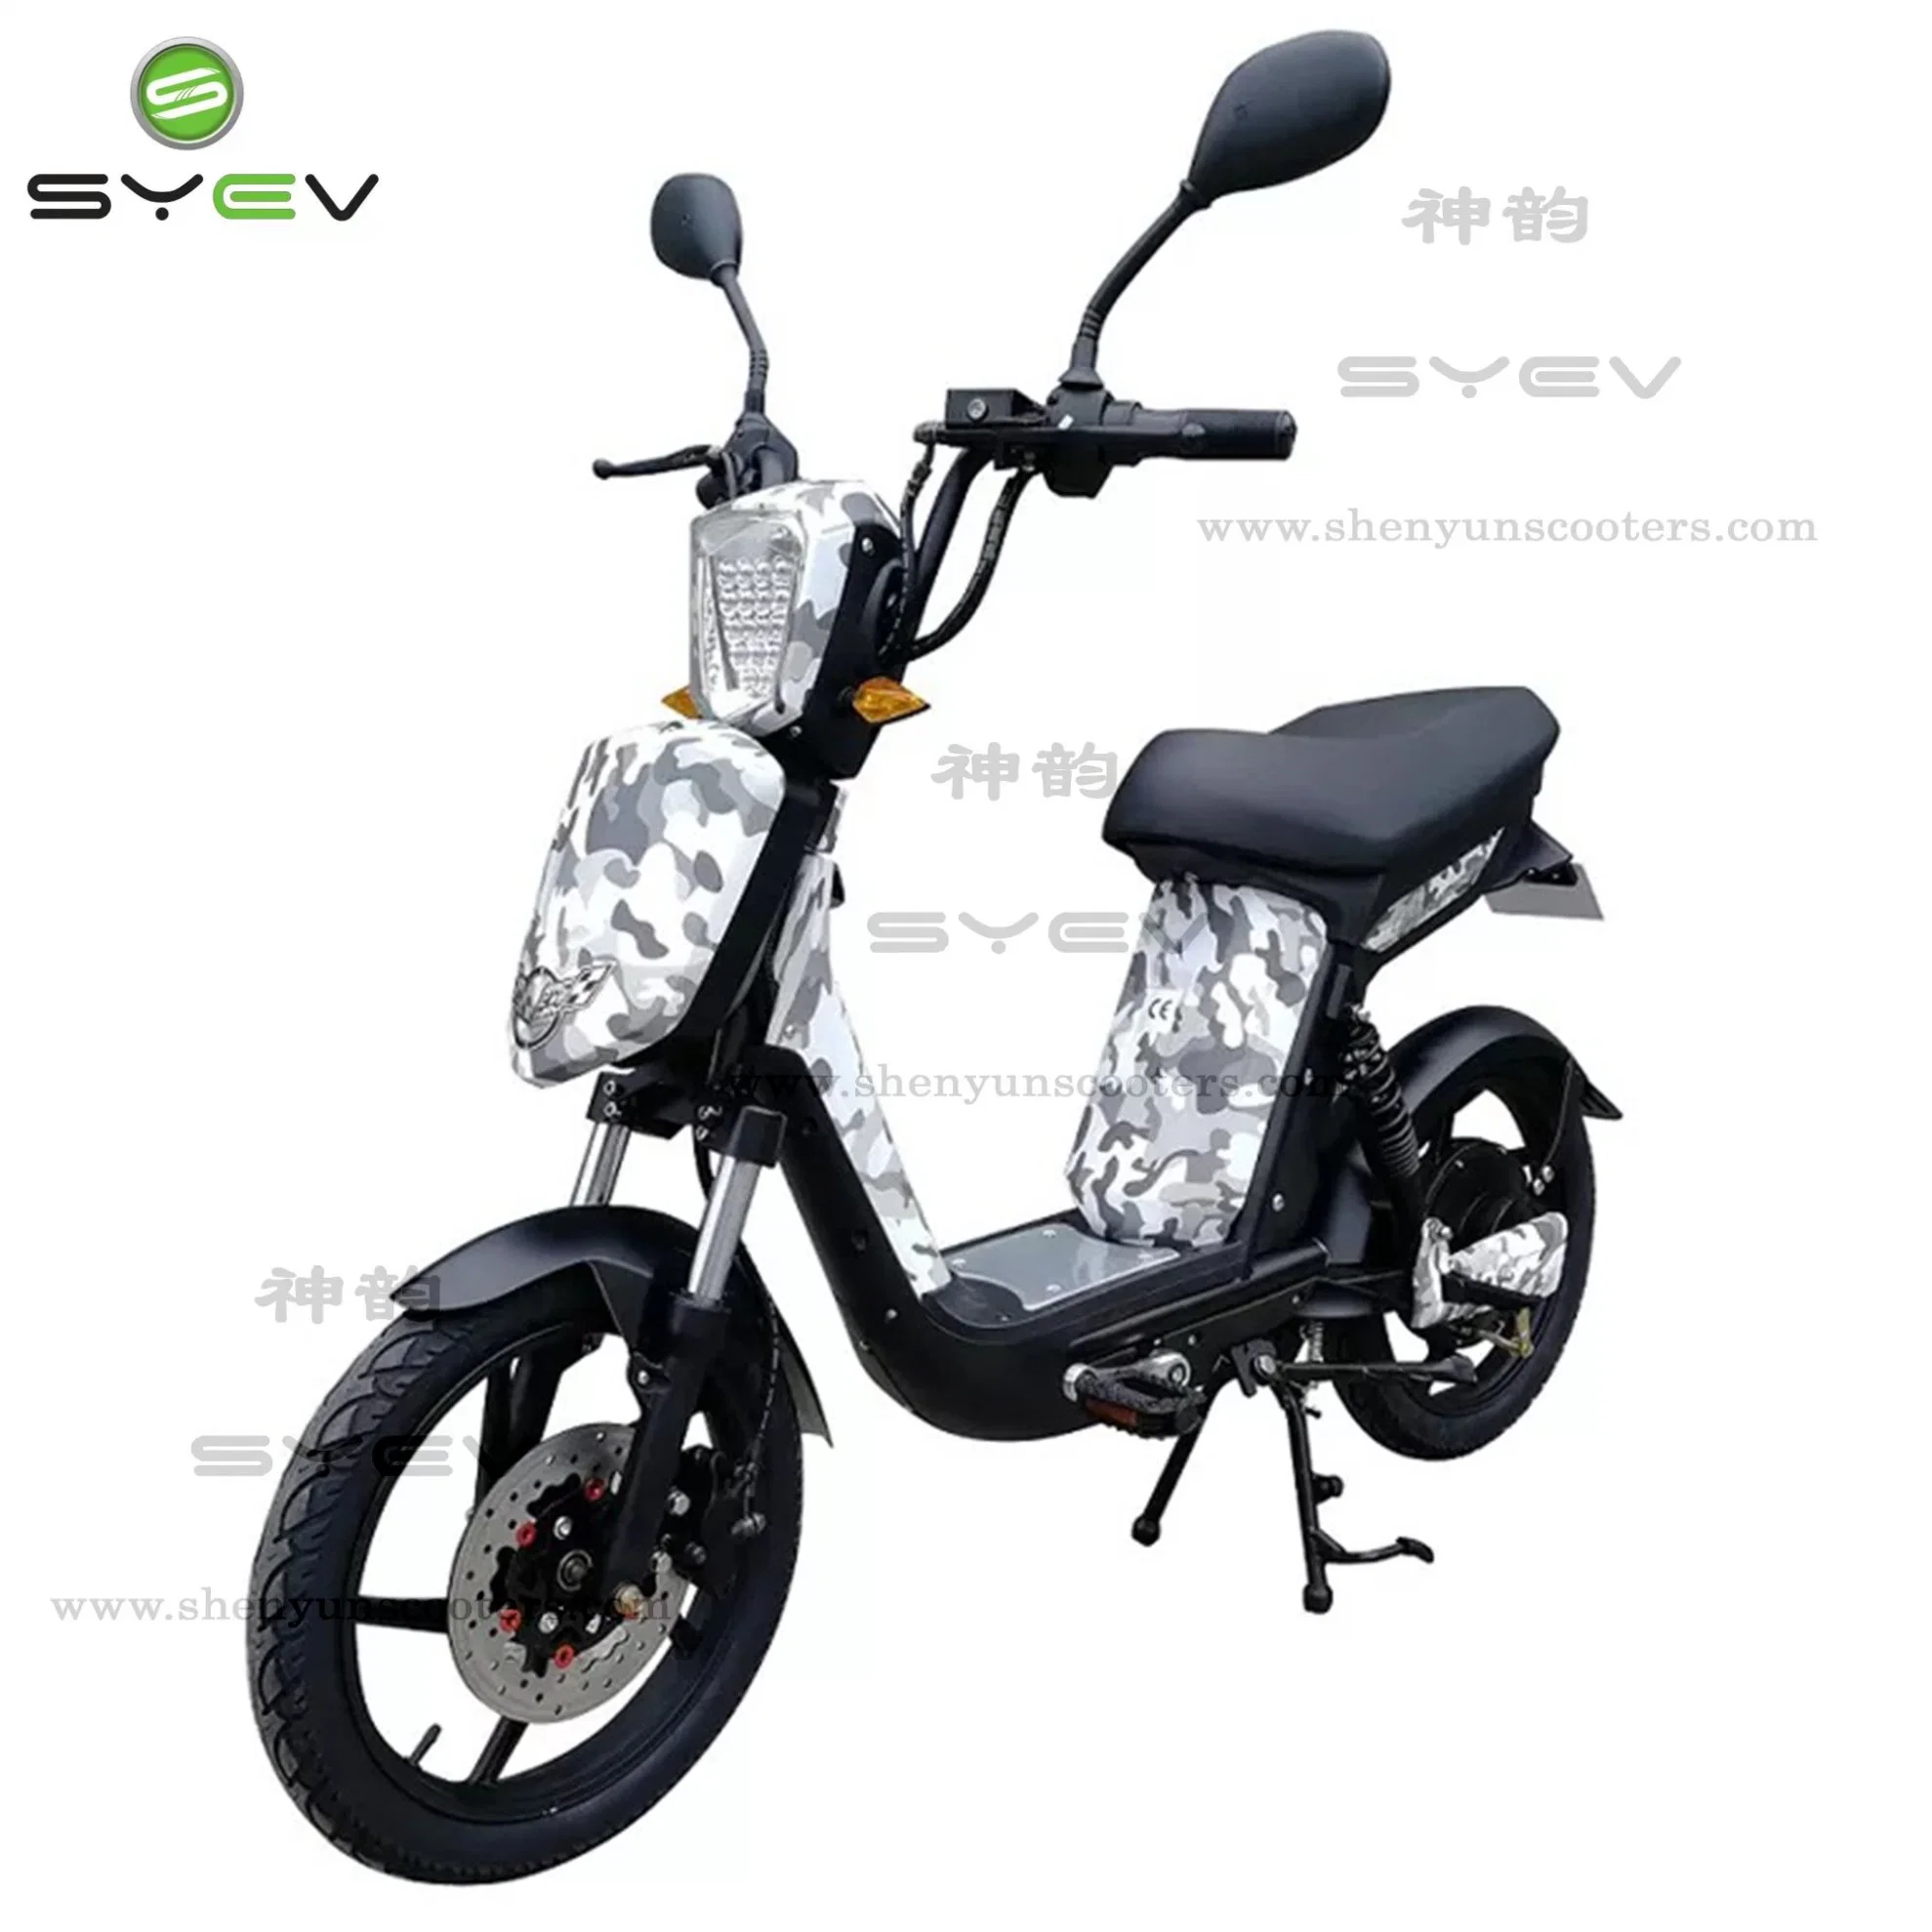 Shenyun CE Approved 2 Wheel 2 Basket 48V Cheap Price High Quality Electric Mobility Bike Electronic Motor Scooter with Pedals